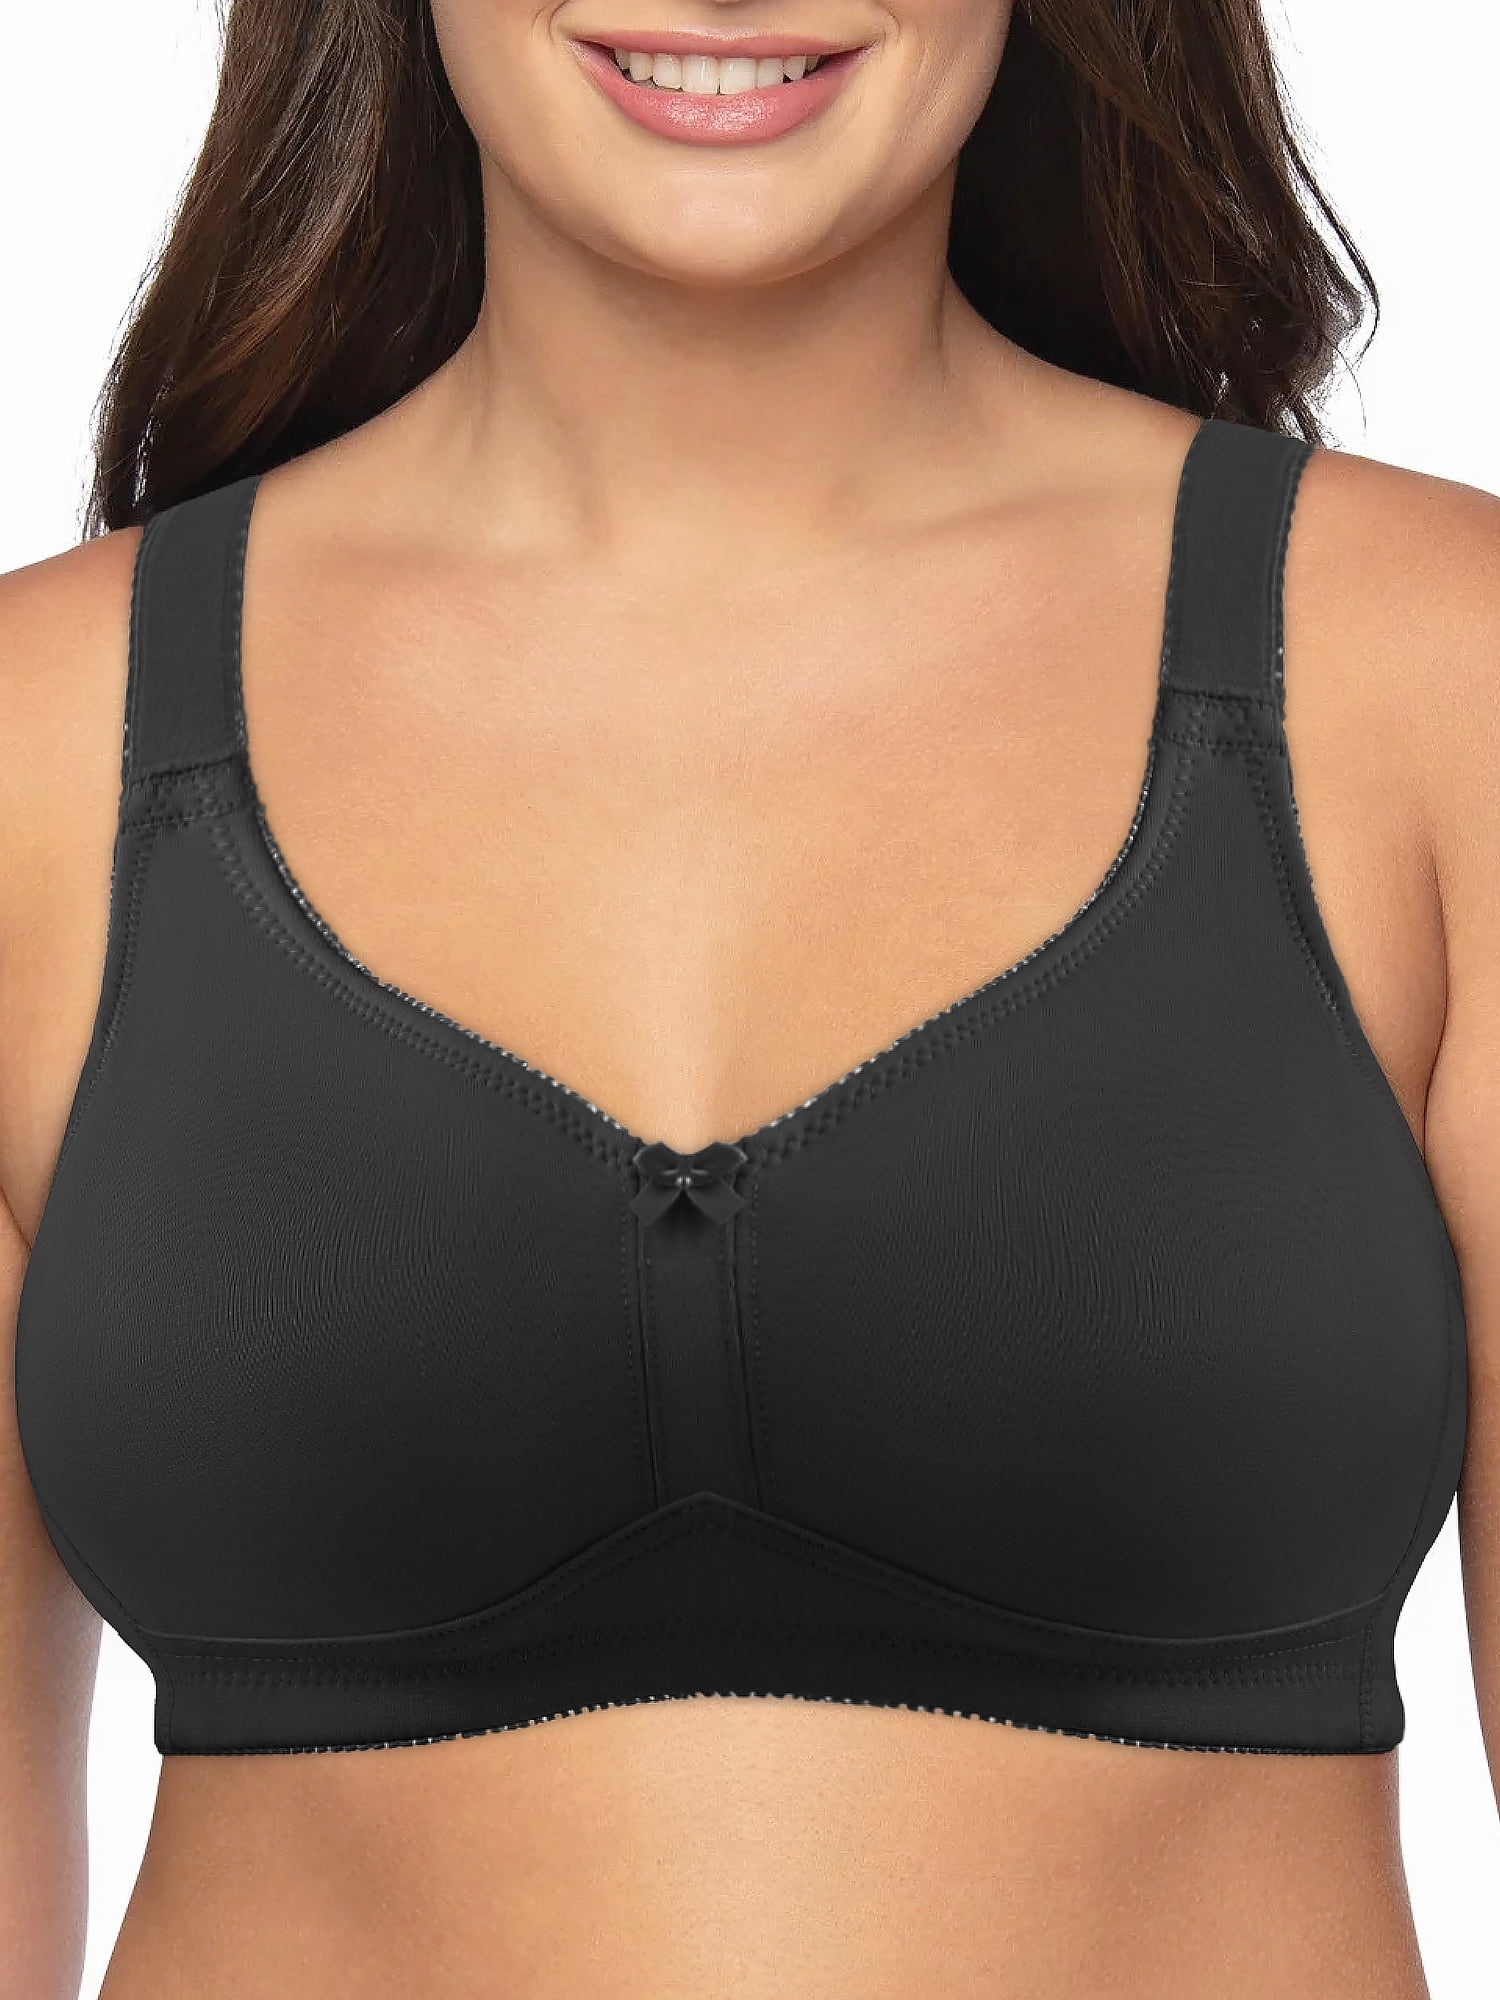 AILIVIN Wireless Bras For Women Comfort Surgery Bra With Adjustable Straps  Great Support Comfort Women Bras No Wire Bras Lift Up Bras Full Coverage  Soft Compression Bra Black 42D 